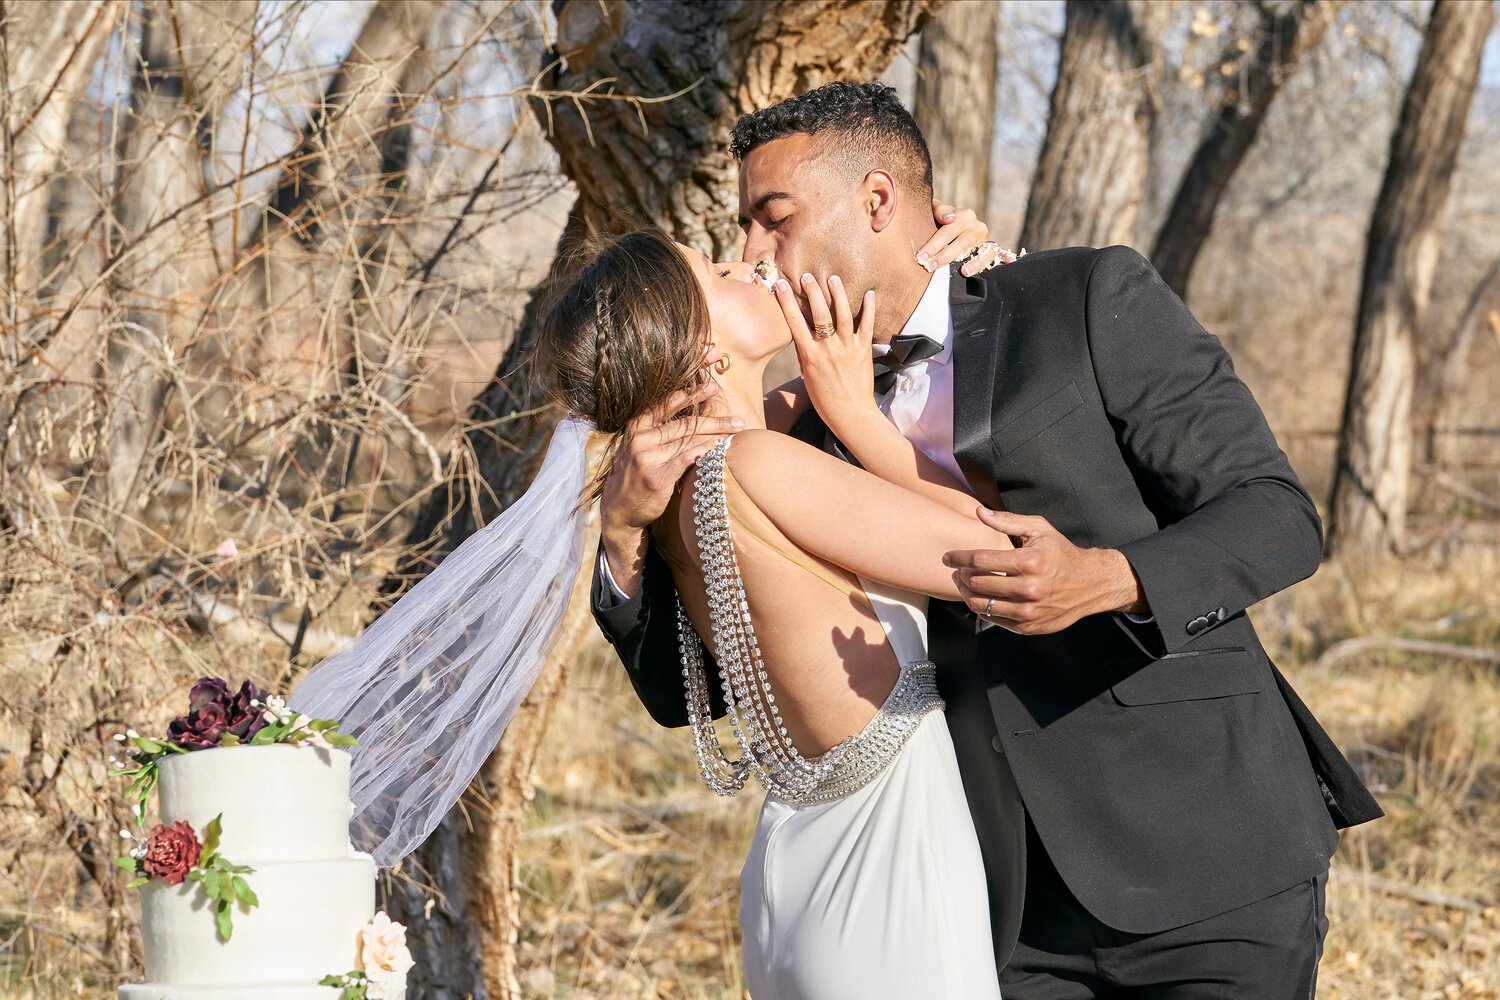 Katie Thurston and Justin Glaze kiss in their wedding attire for their one-on-one on 'The Bachelorette'